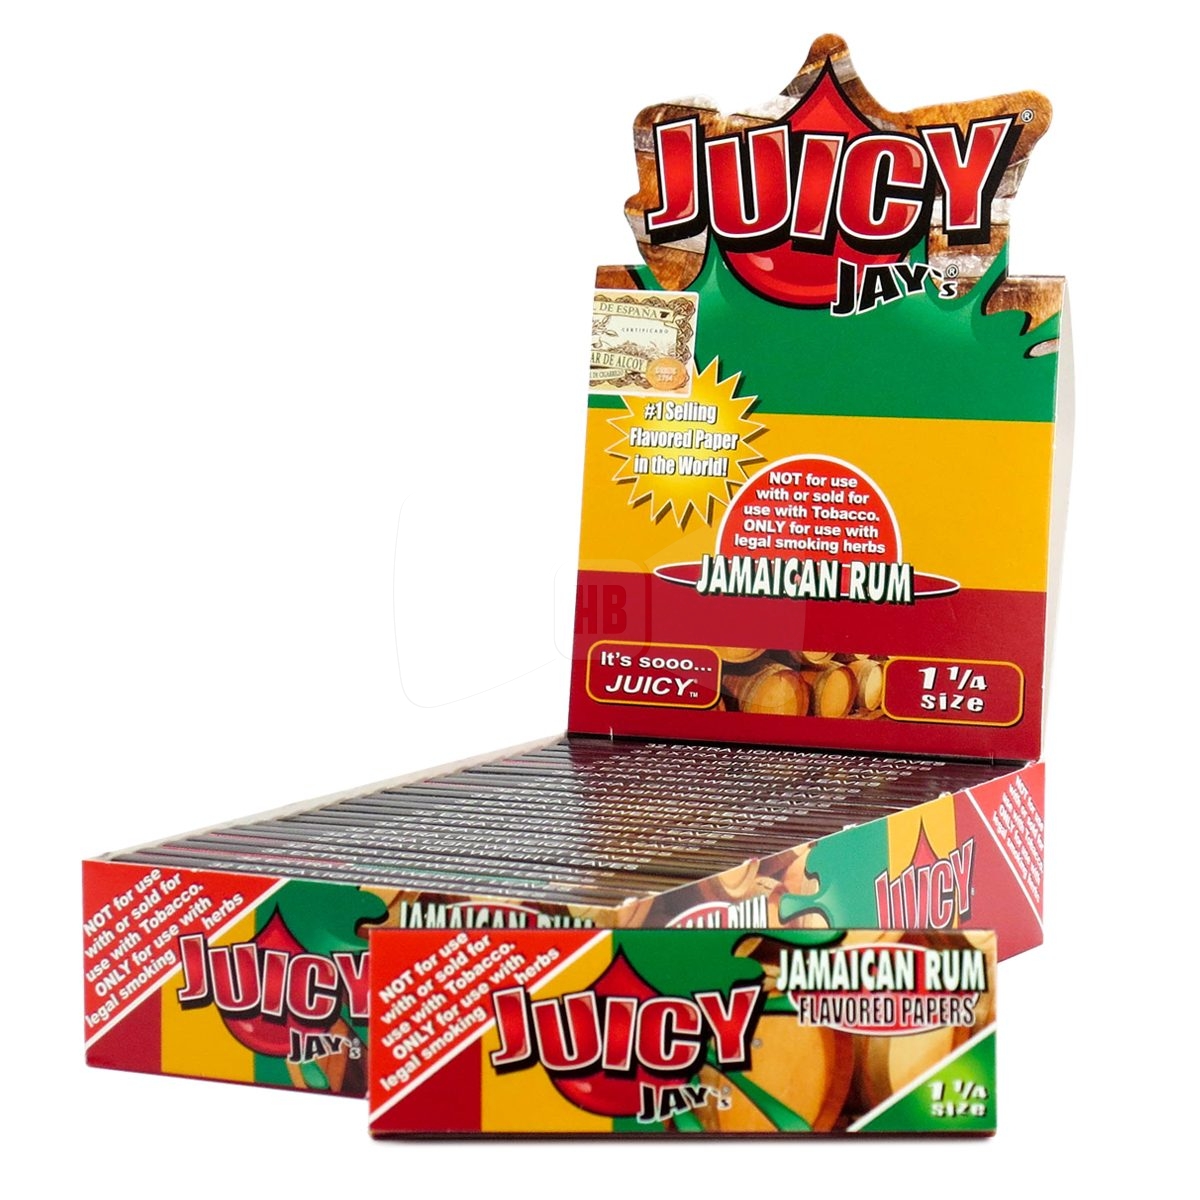 Juicy Jays Jamaican Rum Rolling Papers Full Box (24 packs) King Size